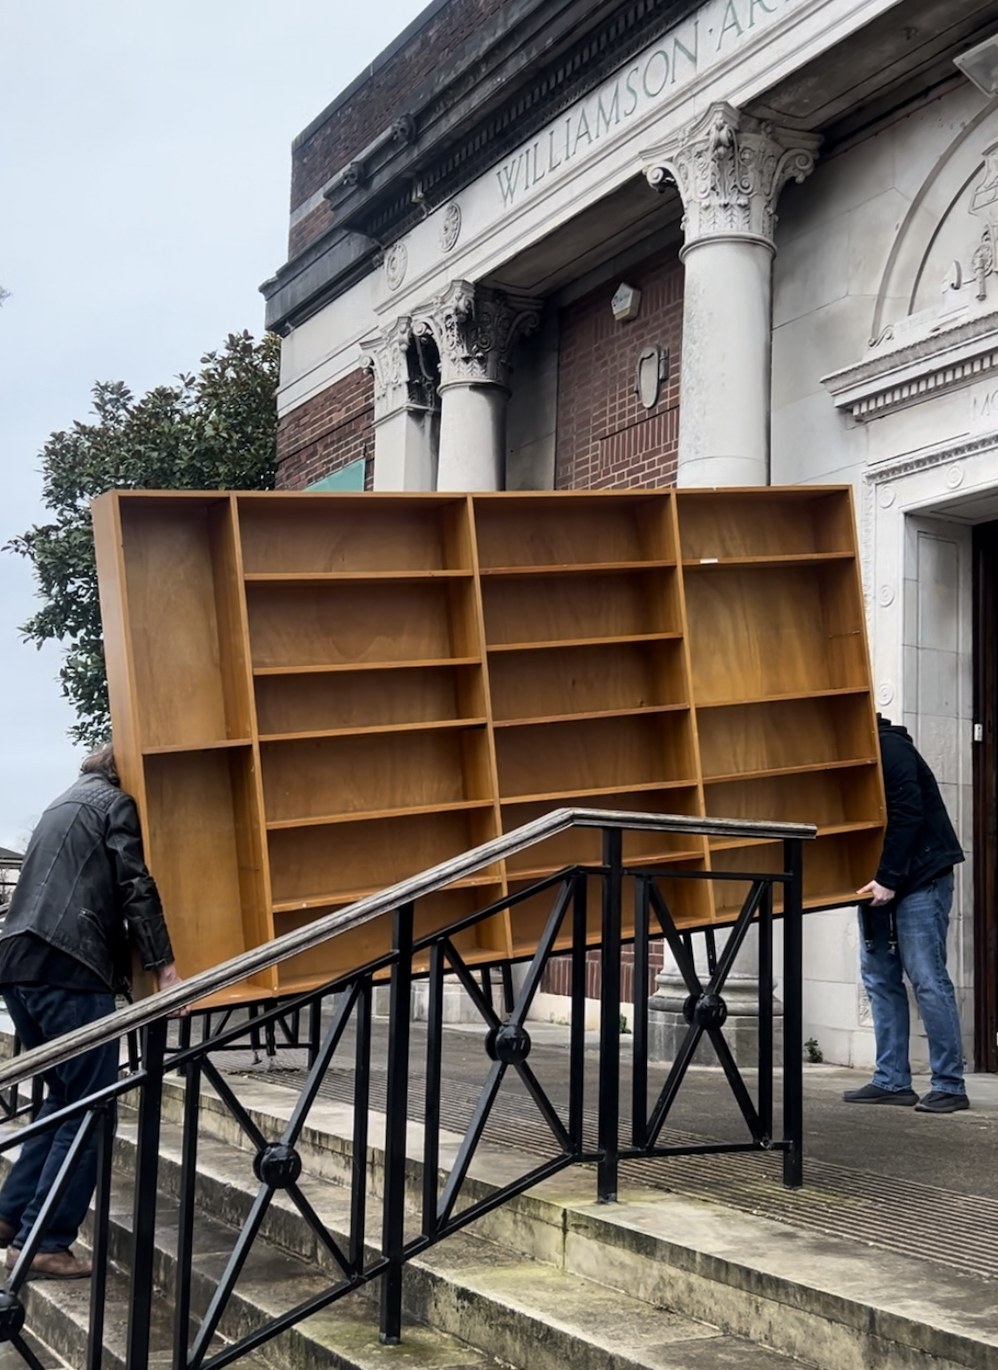 Moving the book shelves